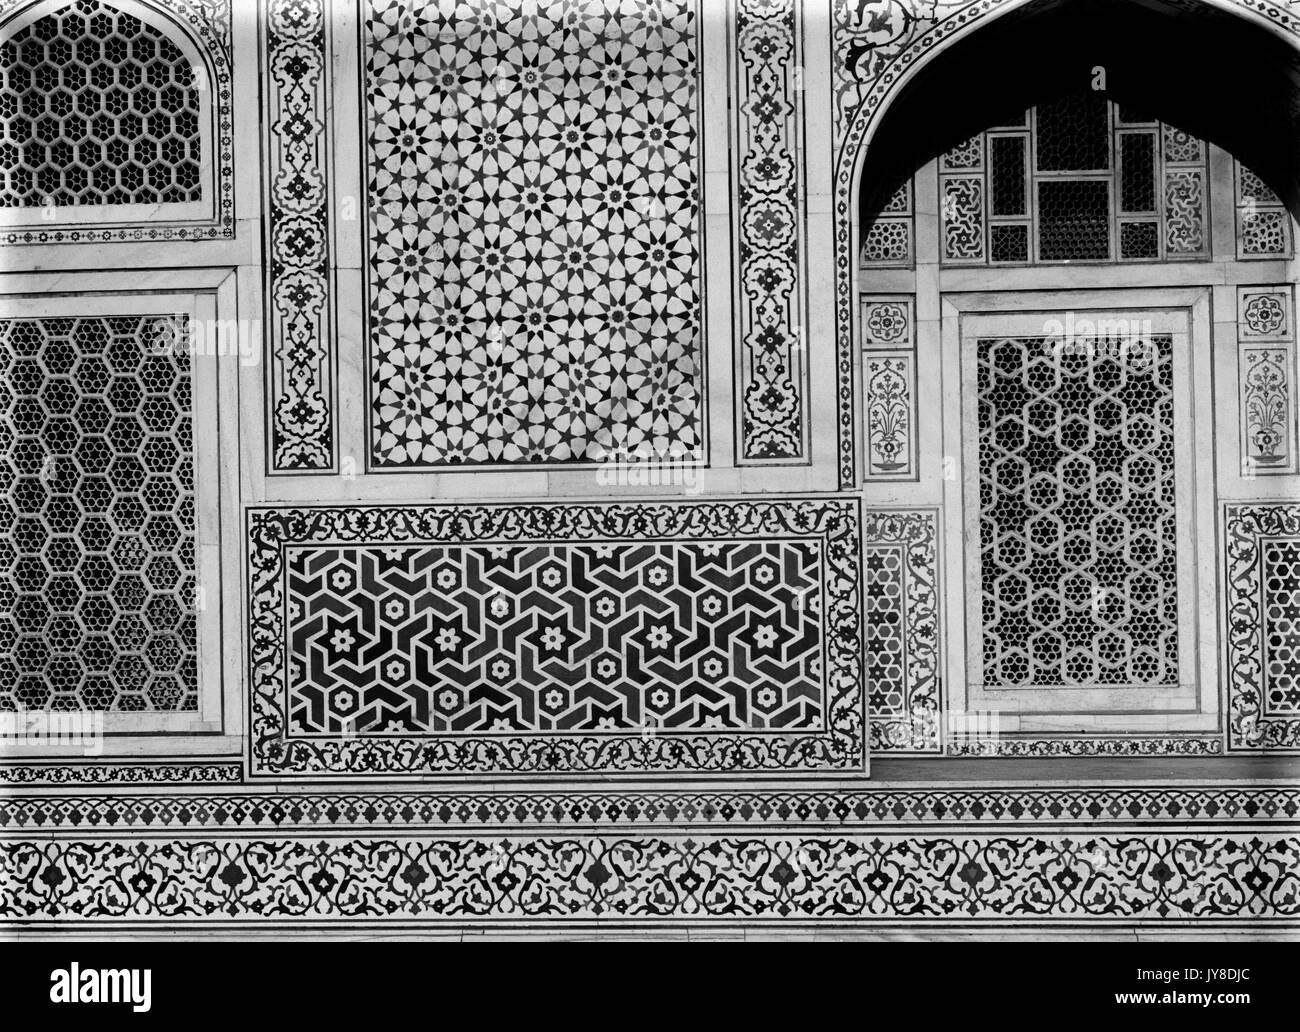 AJAXNETPHOTO. 2ND JANUARY, 1922. AGRA, INDIA. - TOMB OF ITMAD-UD-DOWLAH, FACE WORK INLAY, DETAIL.. PHOTO:T.J.SPOONER COLL/AJAX VINTAGE PICTURE LIBRARY REF; 19220201 1017 Stock Photo